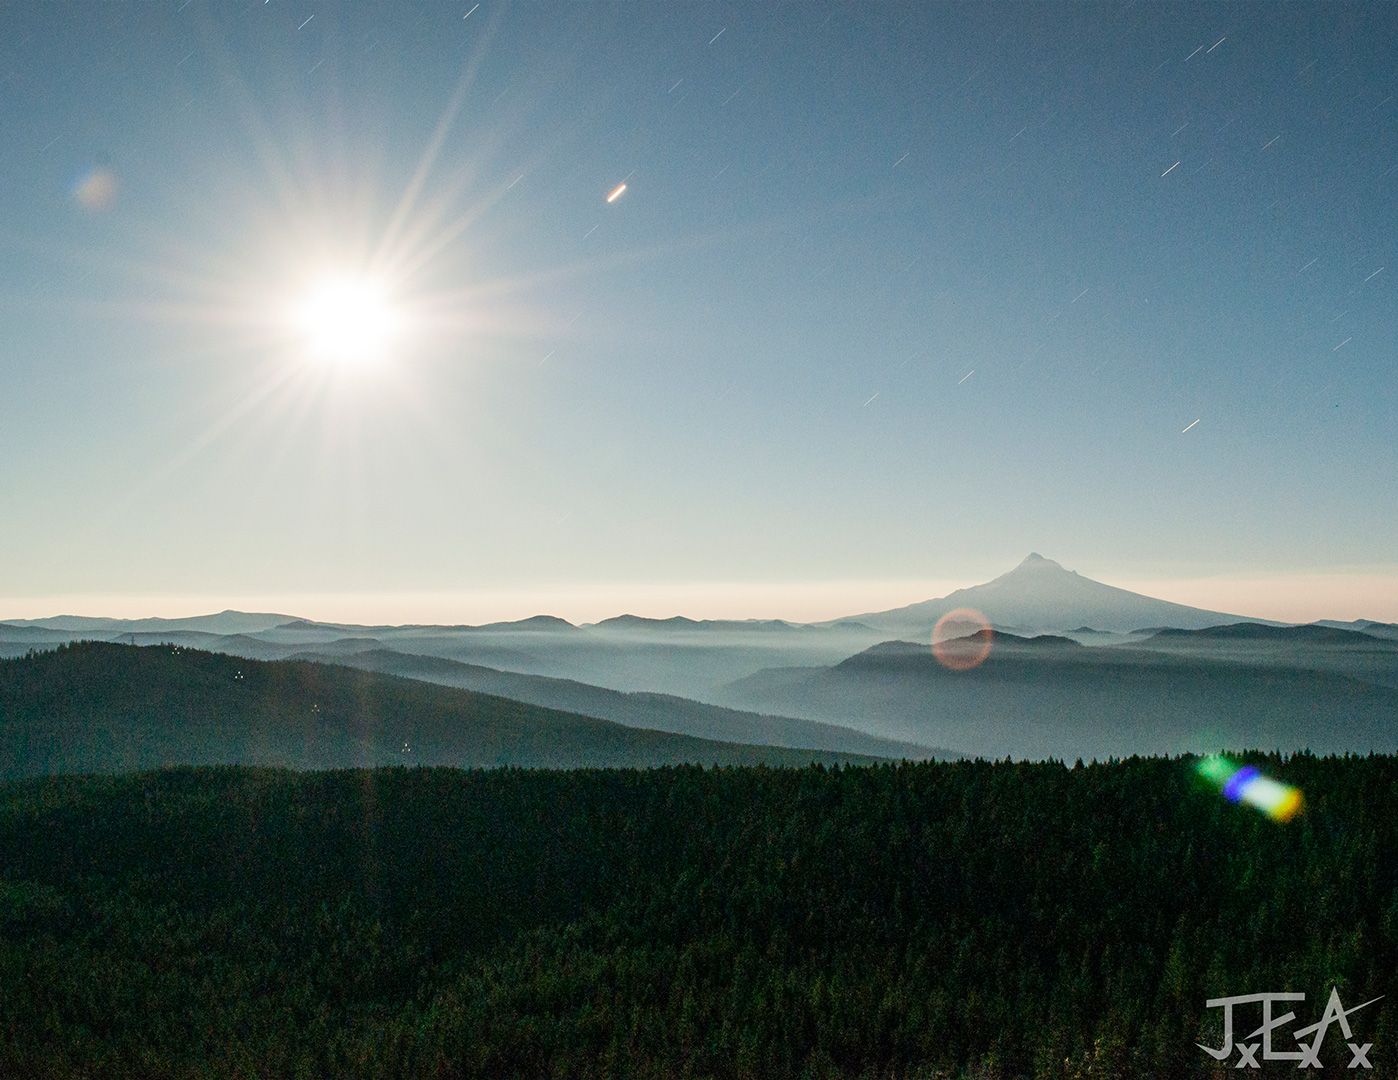 Mt Hood and a bright shining moon both sit in the distance over foggy forested hills.